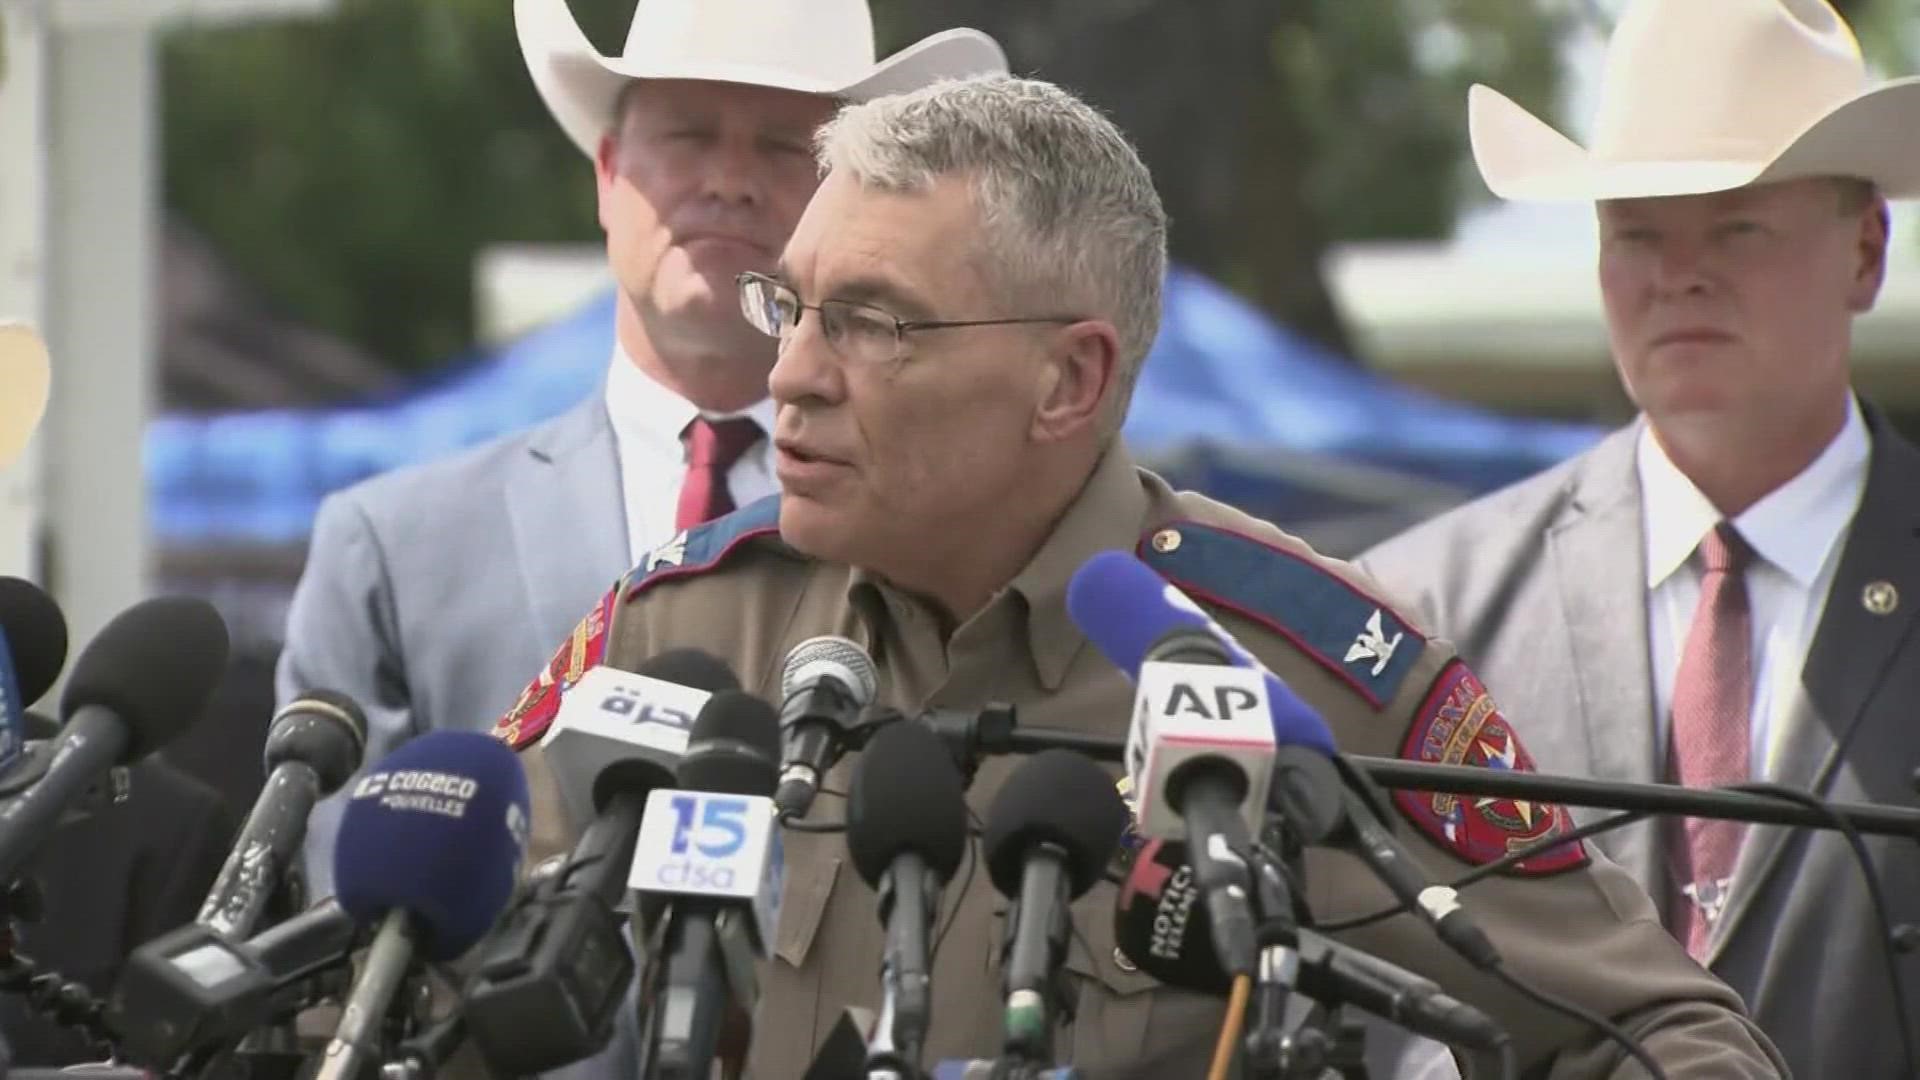 New details regarding Tuesday's mass shooting at a Uvalde elementary school came during a news conference Friday from Texas DPS Director Steven McCraw.